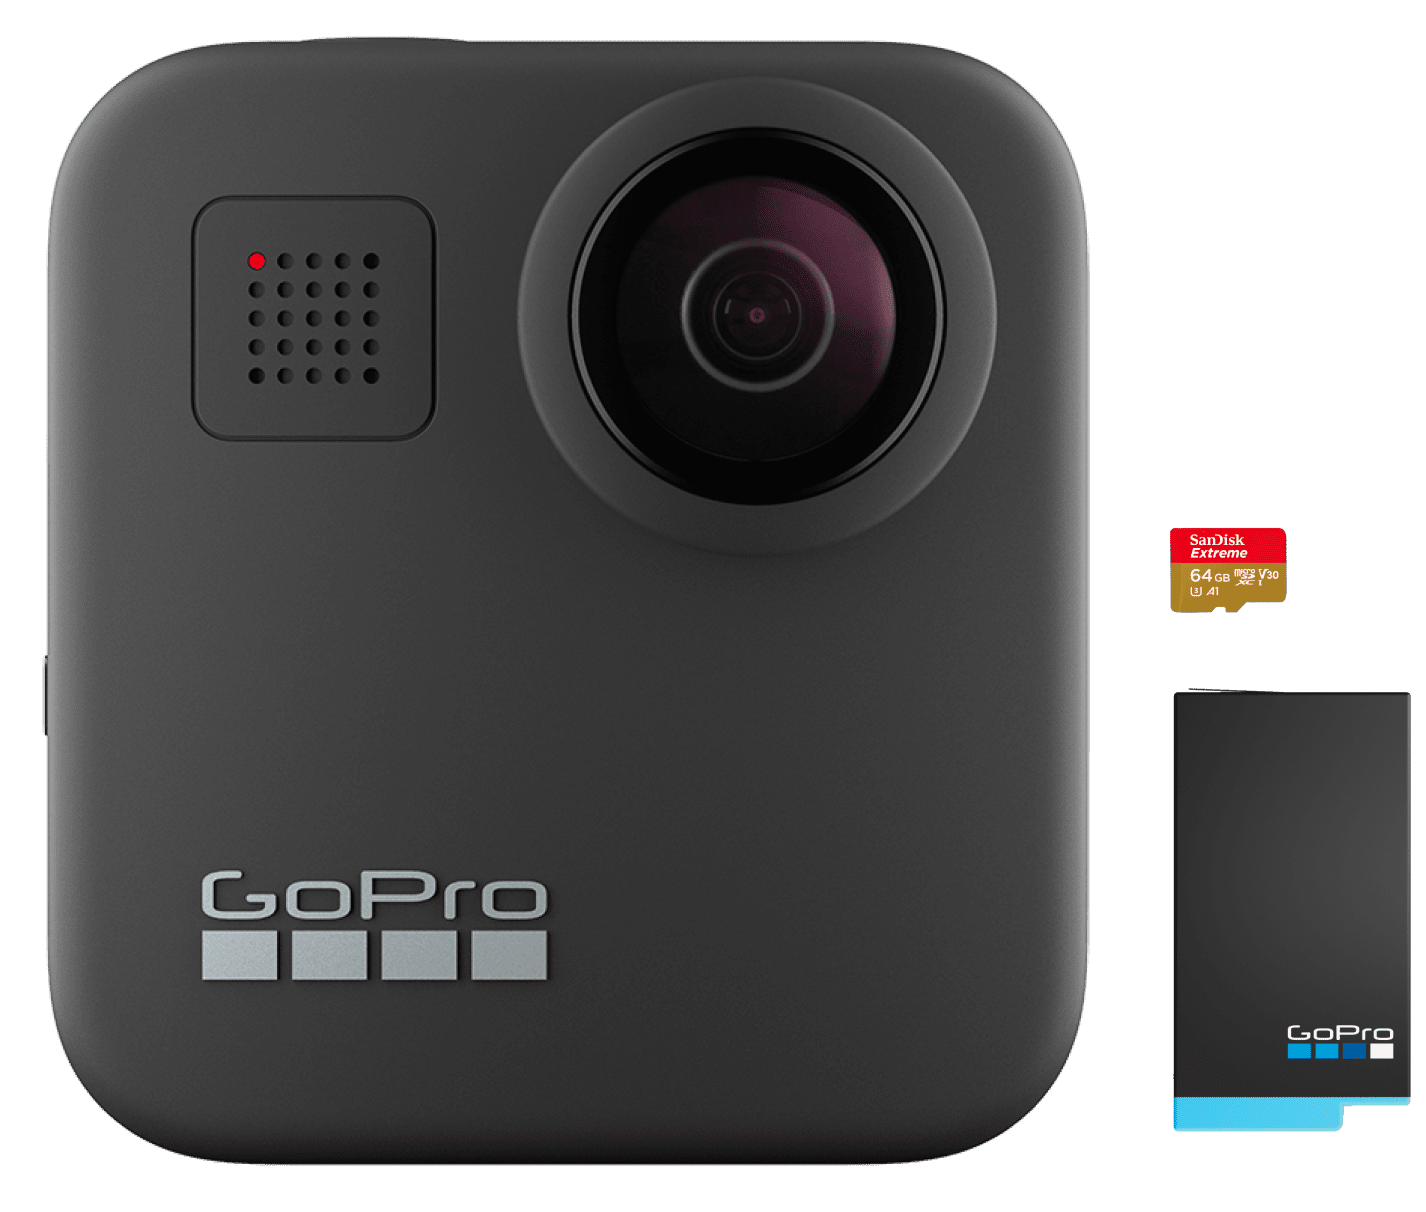 A Go Pro Max with a micro SD card and rechargable battery